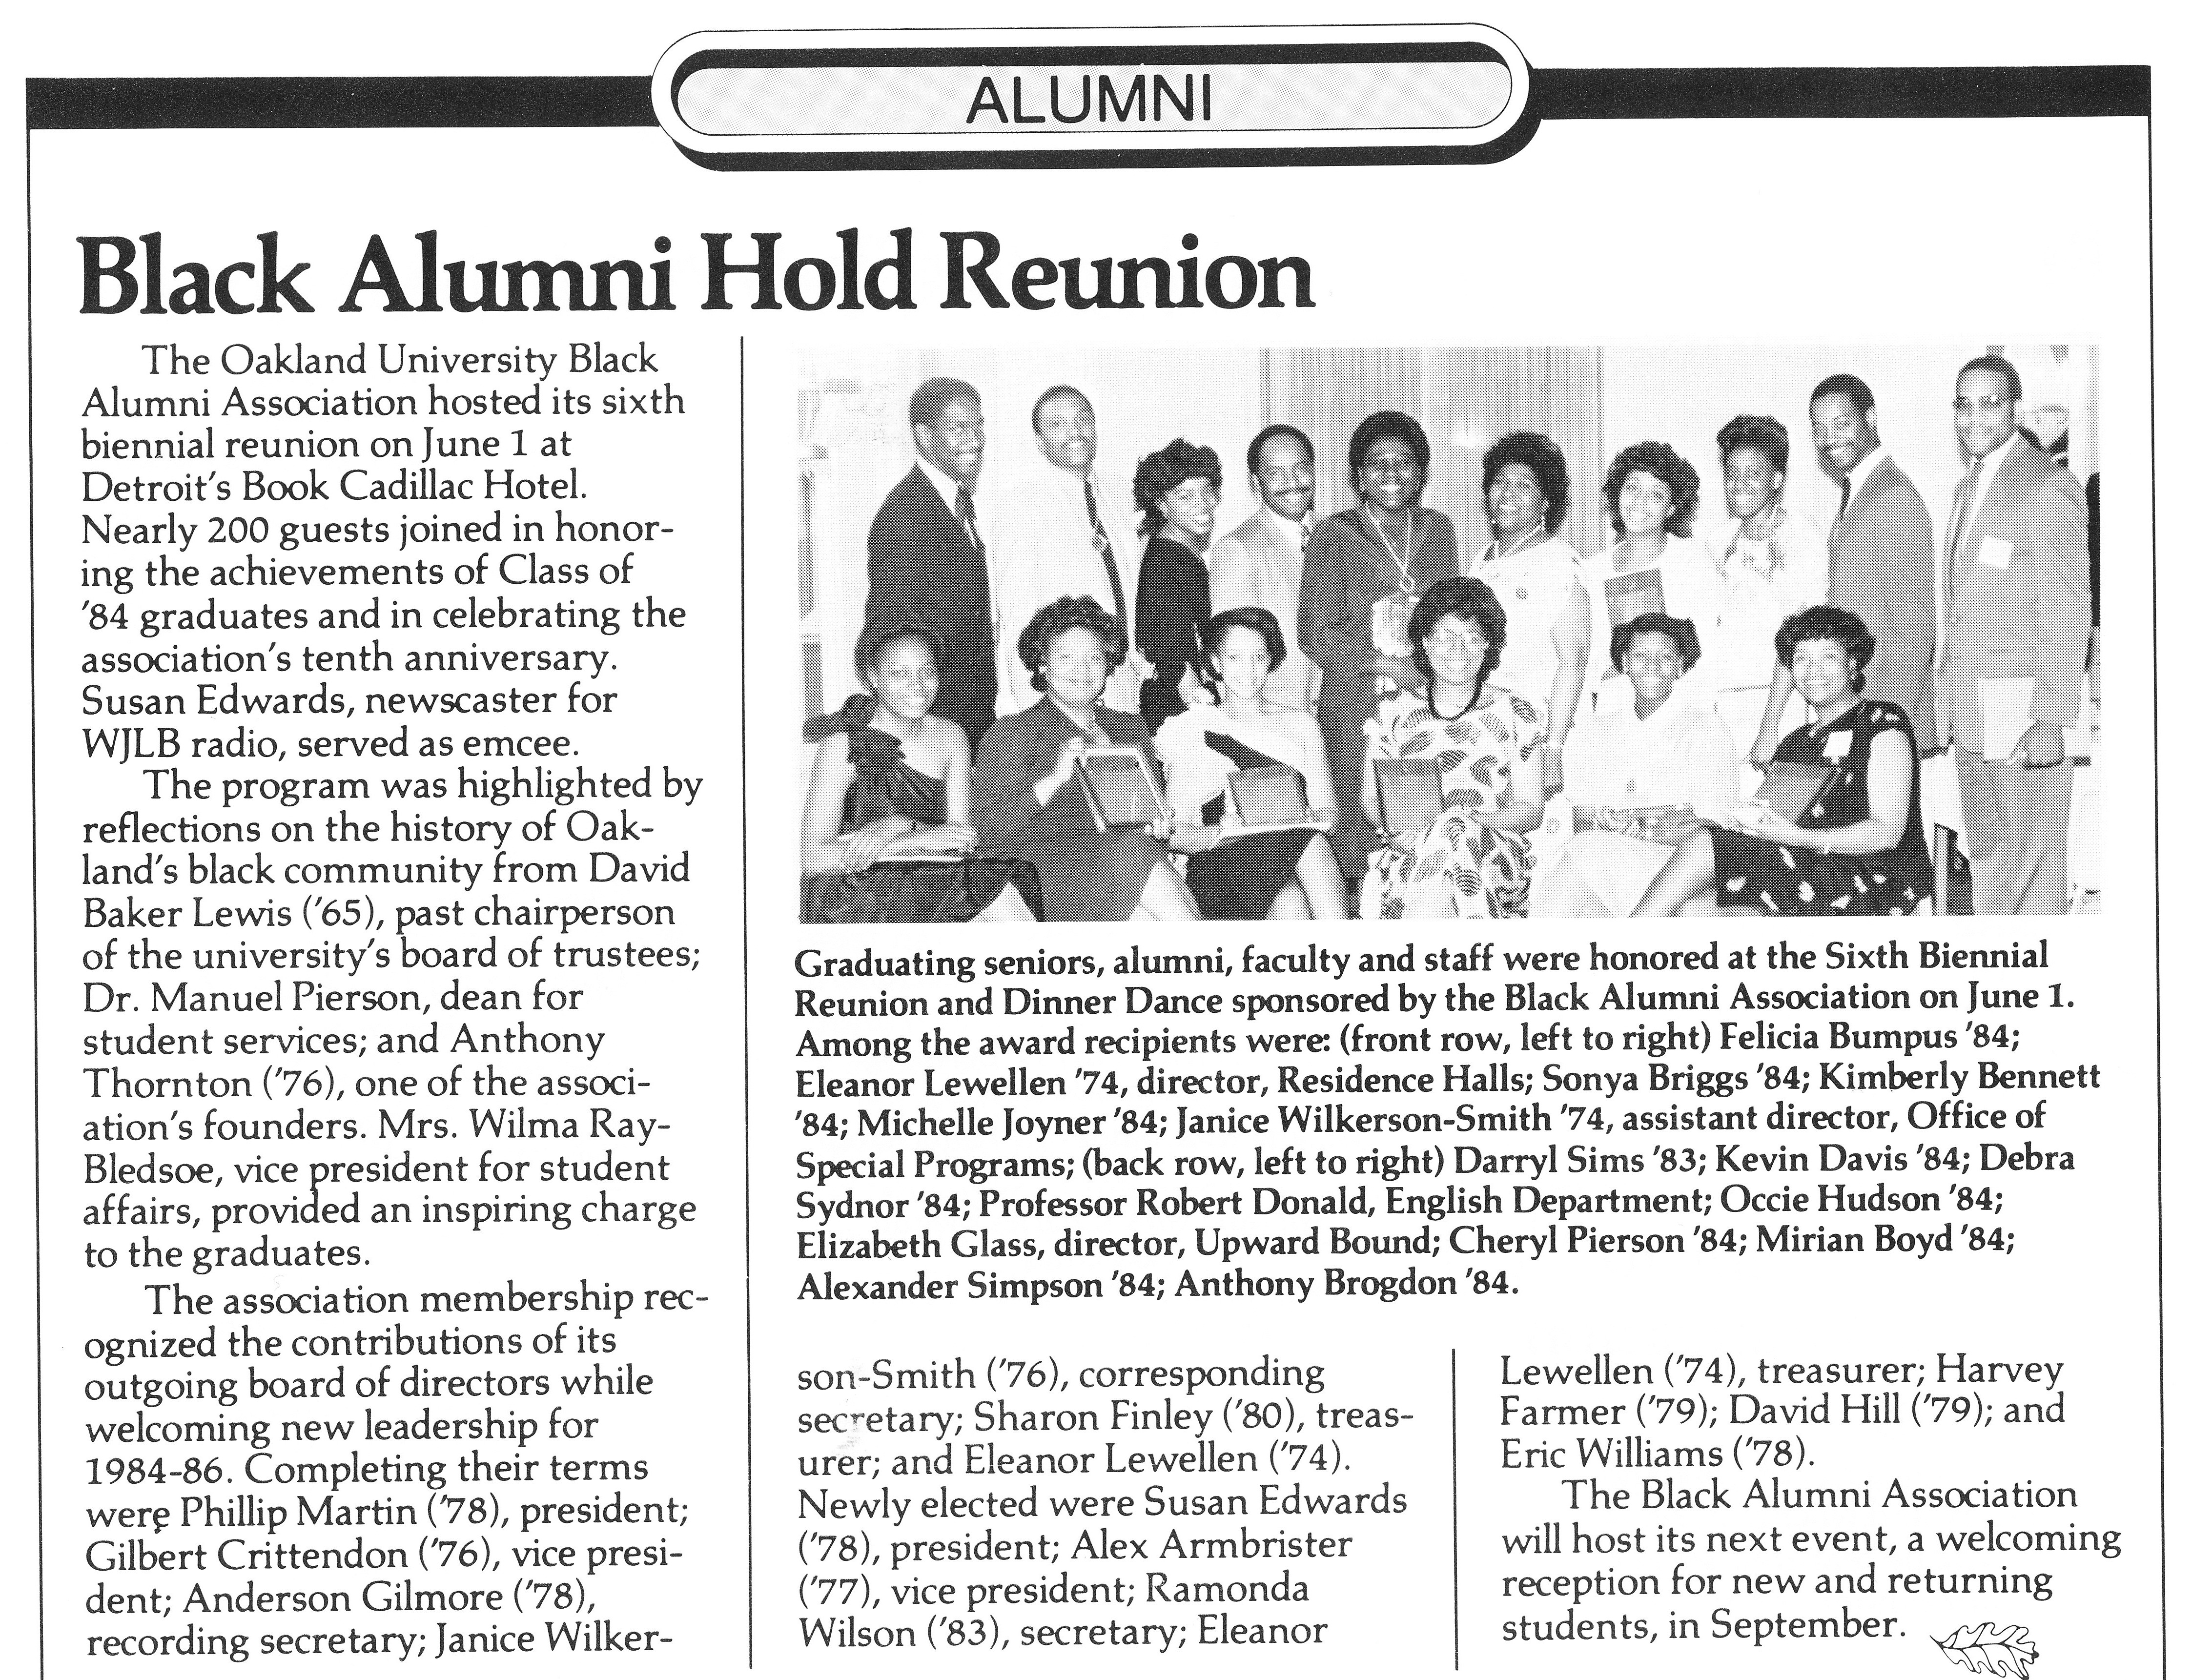 News clipping from the OU Magazine, 1984, showing black alumni at their reunion.